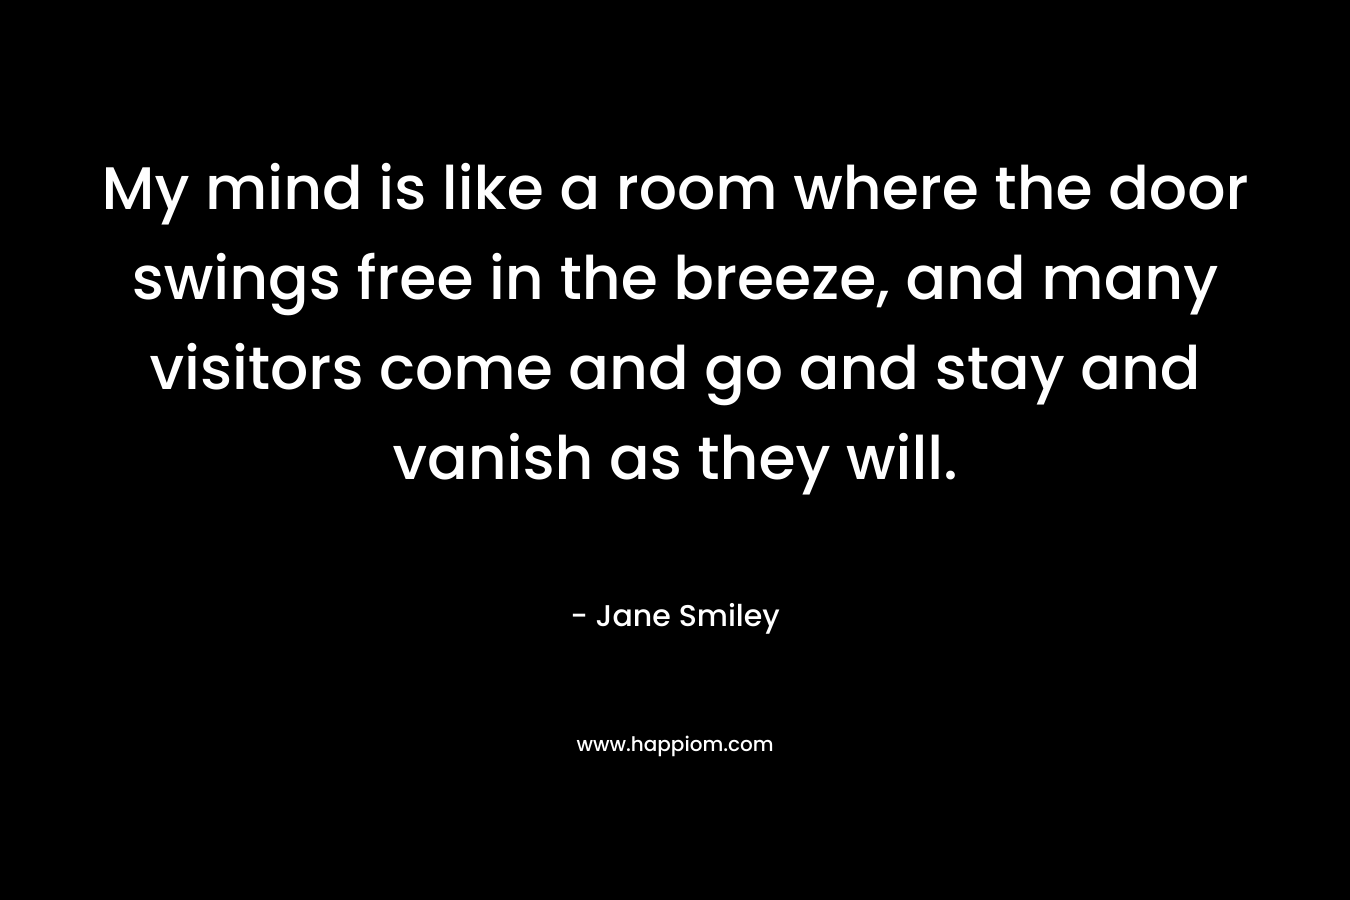 My mind is like a room where the door swings free in the breeze, and many visitors come and go and stay and vanish as they will. – Jane Smiley